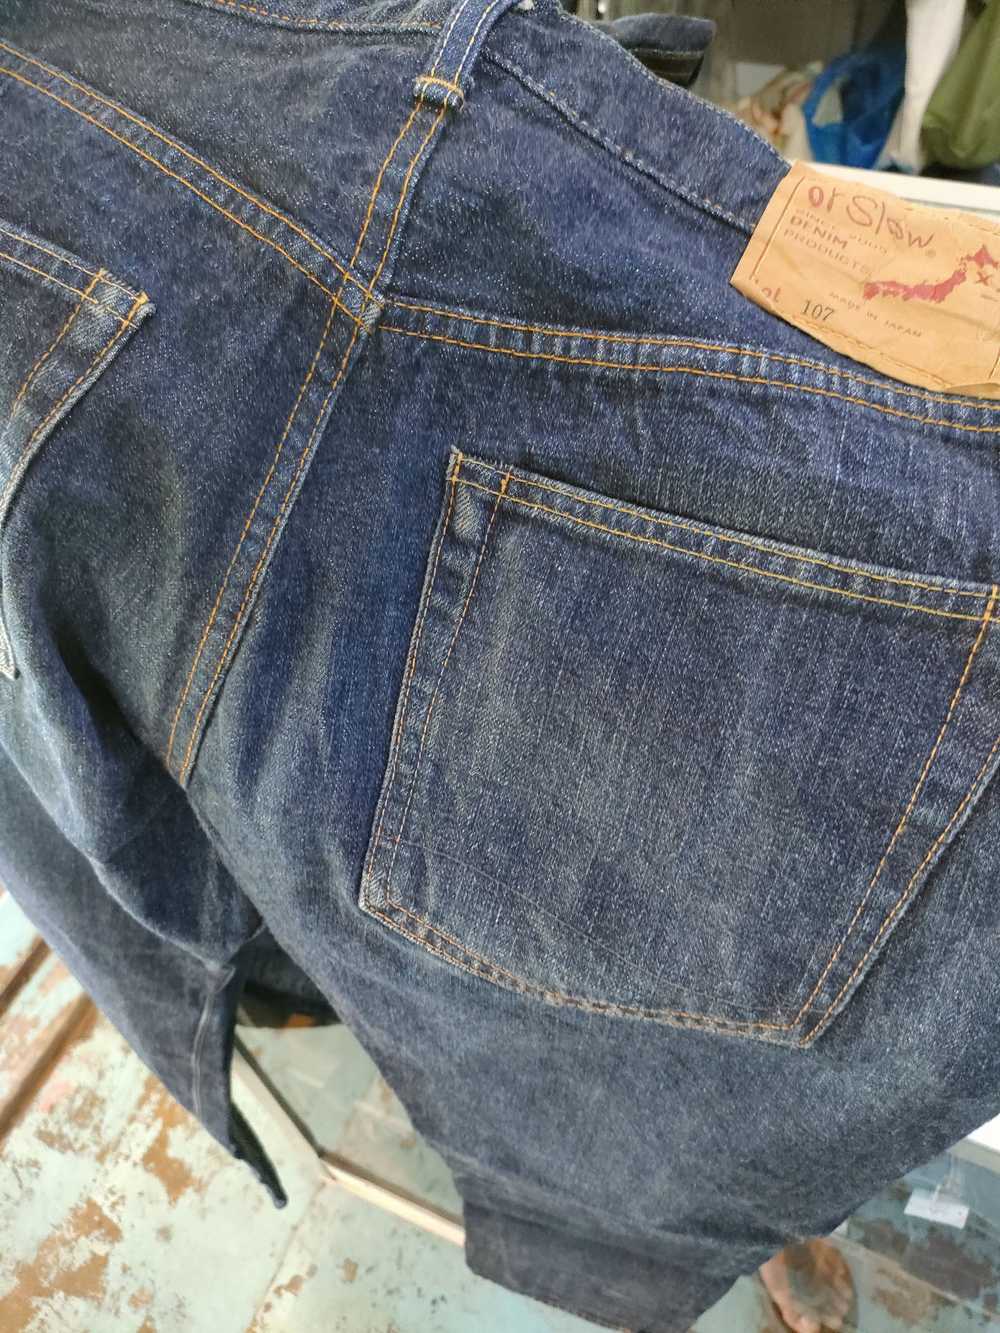 Japanese Brand Or Slow Japan Selvedge Jeans - image 9